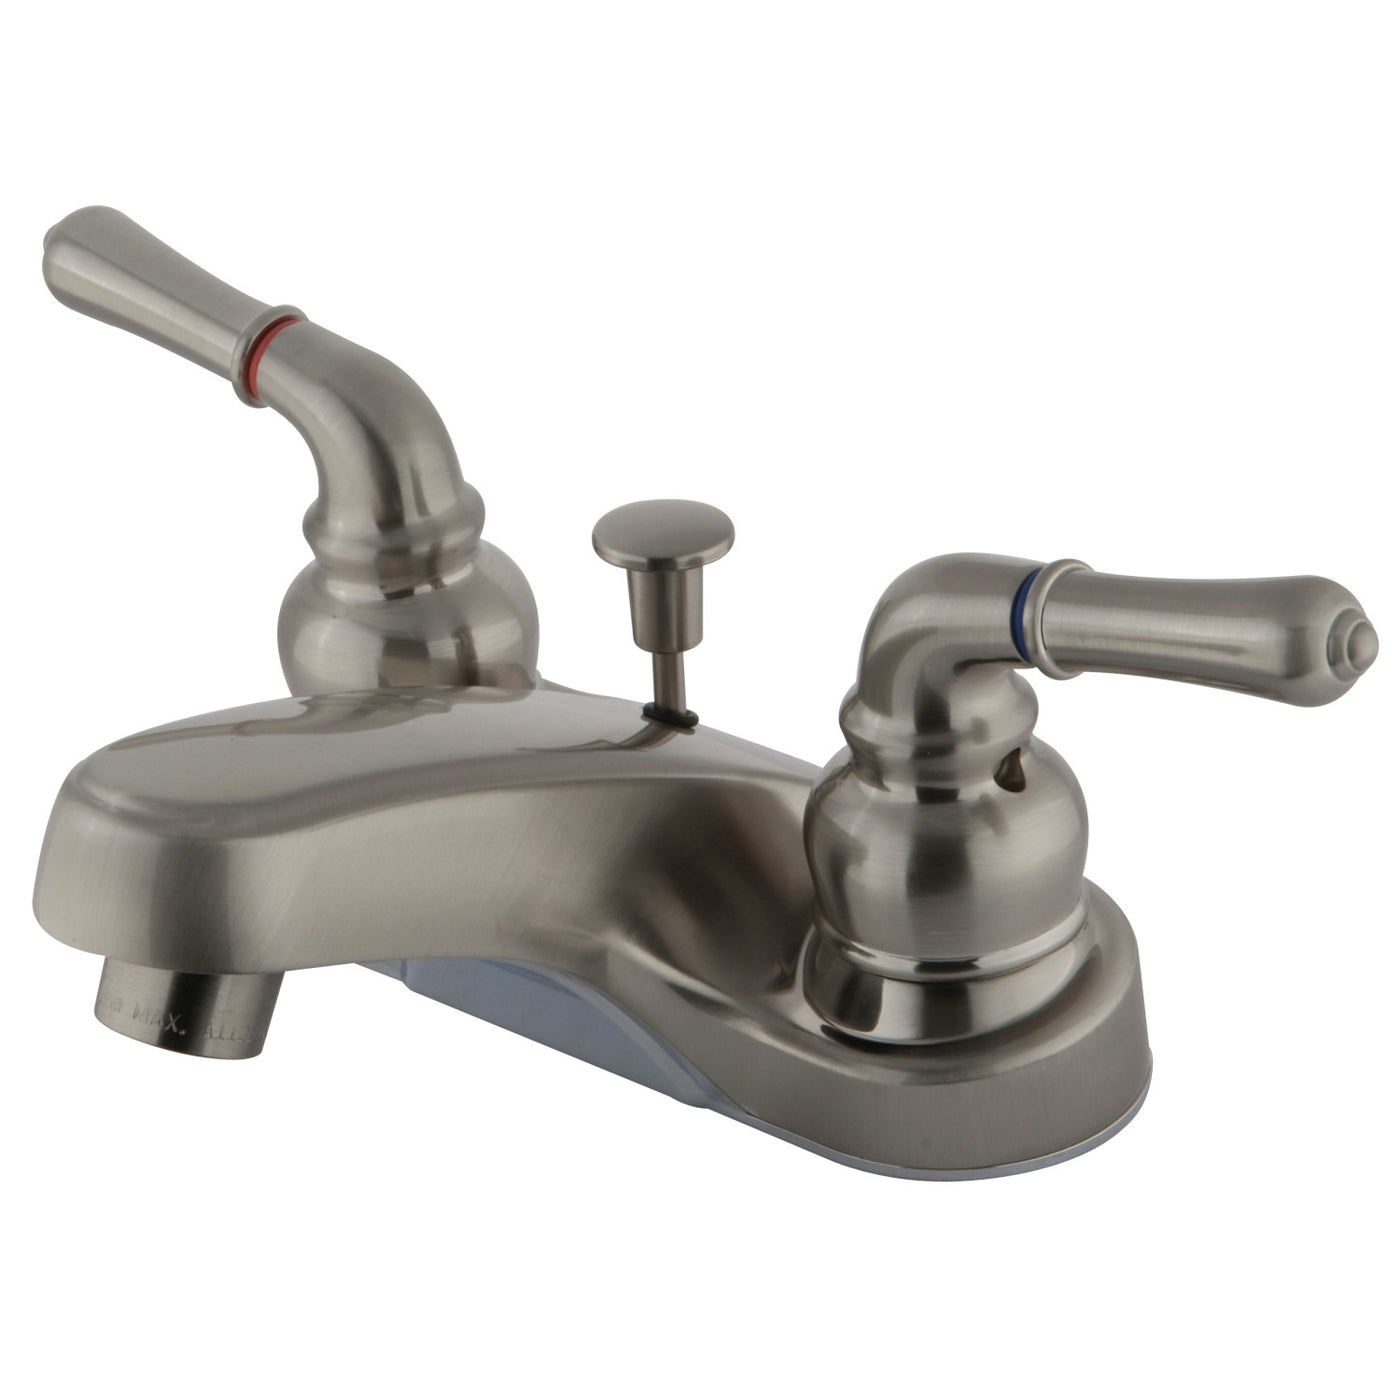 Elements of Design EB258 4-Inch Centerset Bathroom Faucet, Brushed Nickel